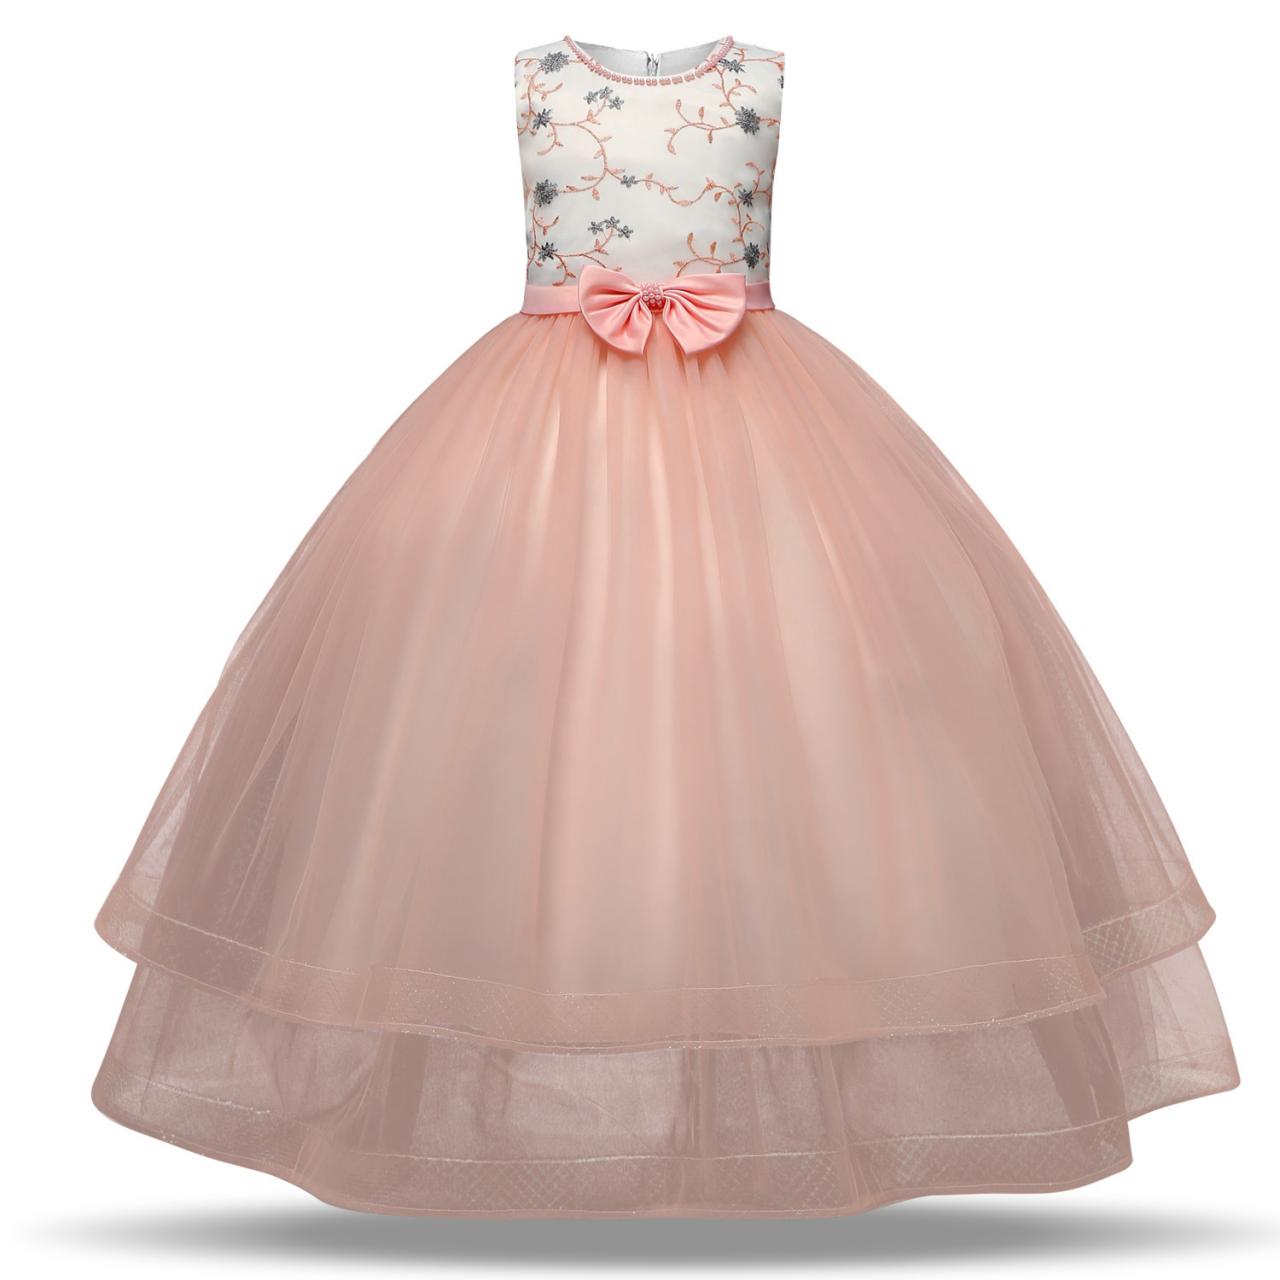 Flower Girls Dress Princess Kids Embroidery Bow Vintage Children Wedding Party Formal Ball Gown